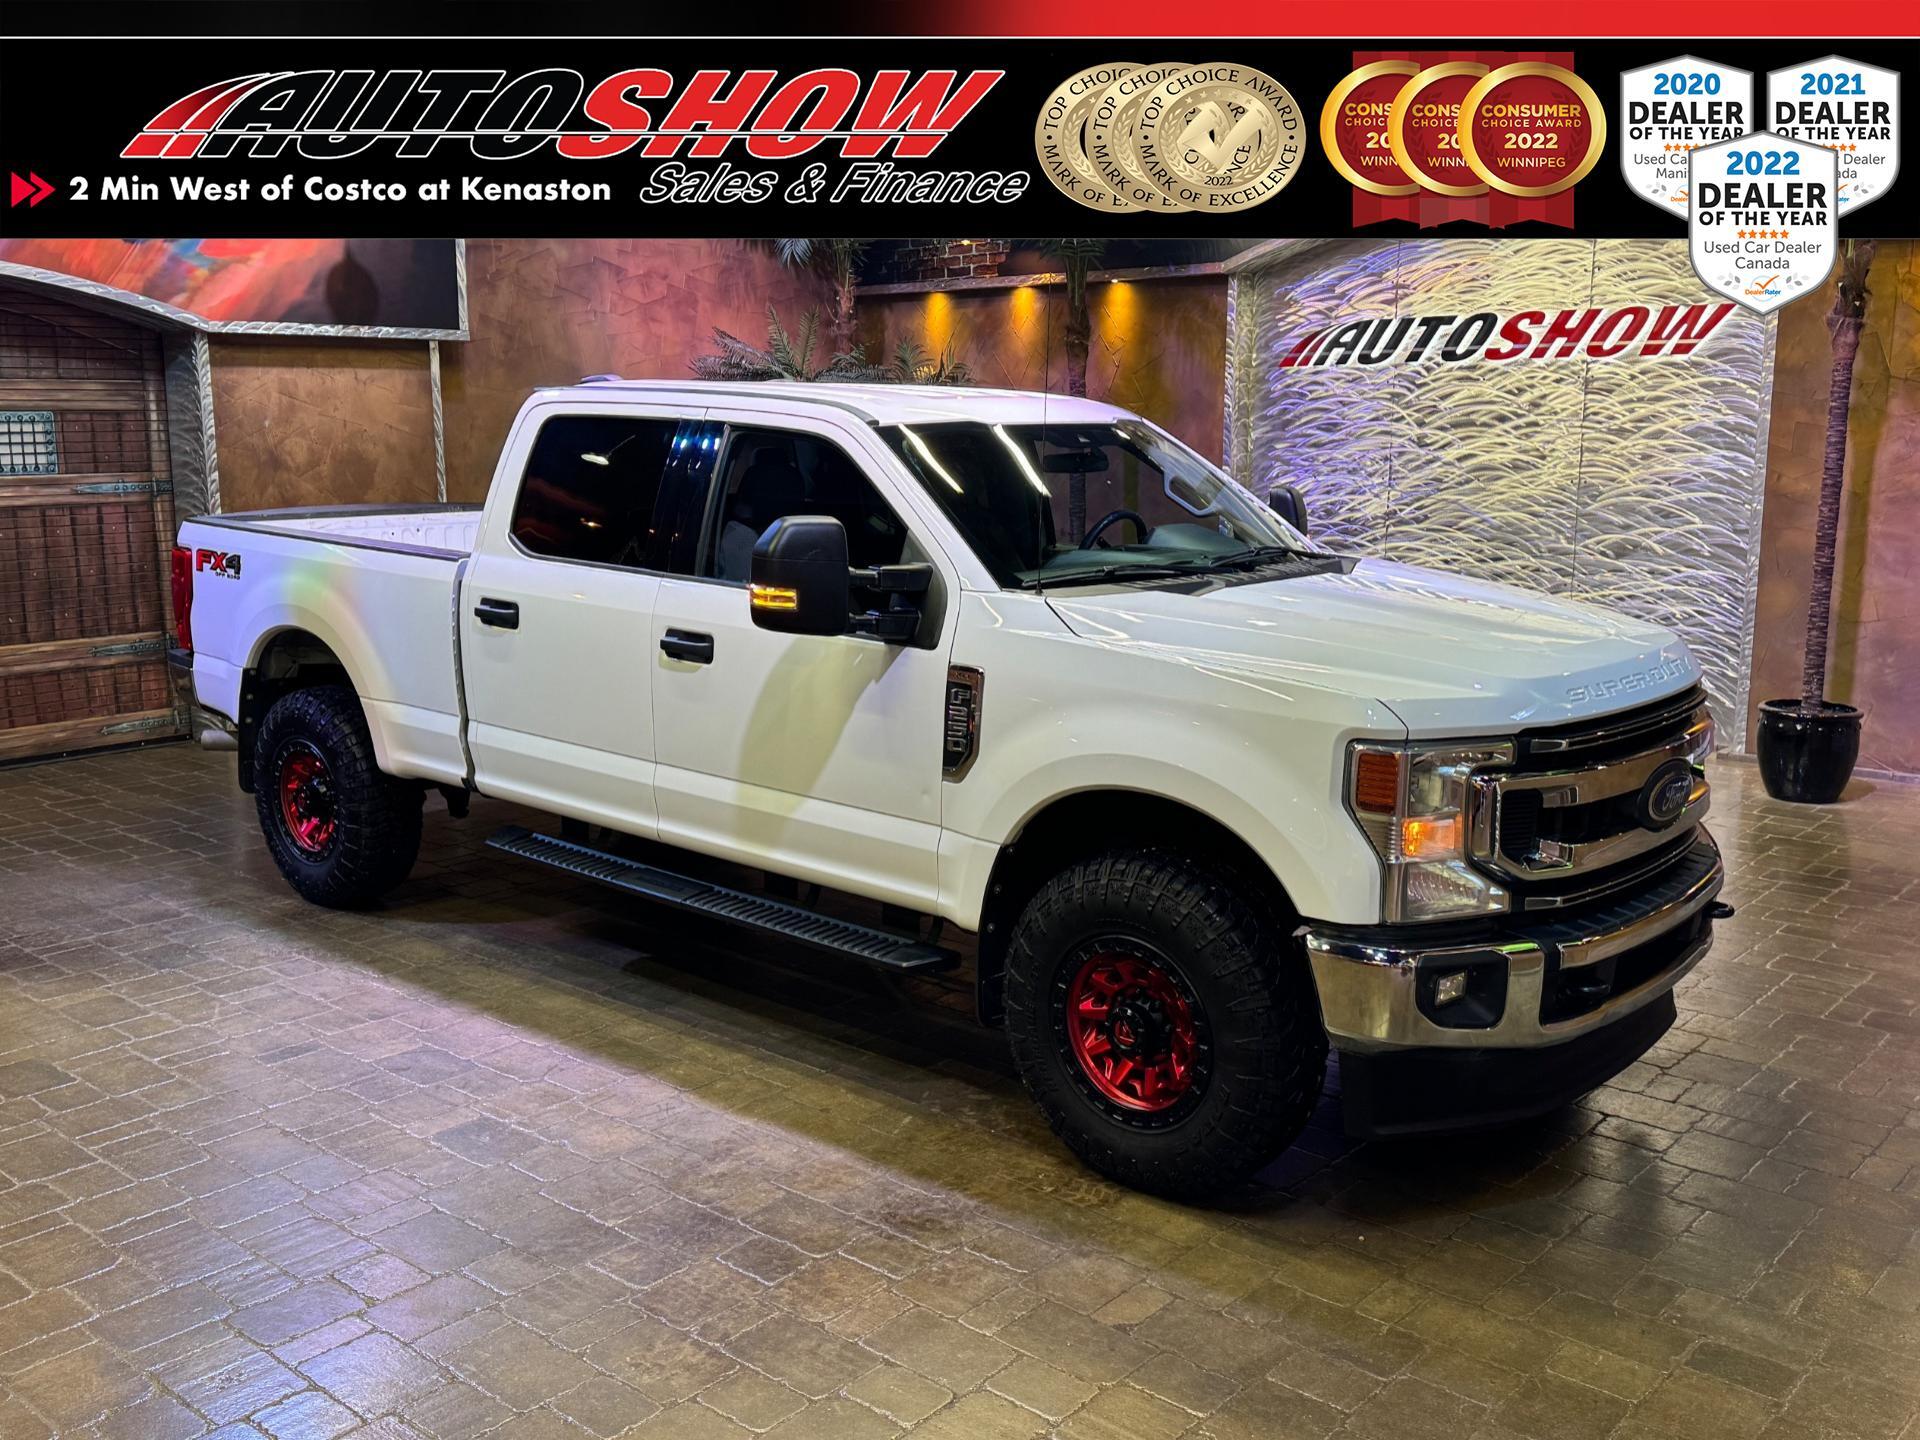 2021 Ford F-250 SUPER DUTY XLT FX4 - 8in Screen, Rmt St, Buckets & Console